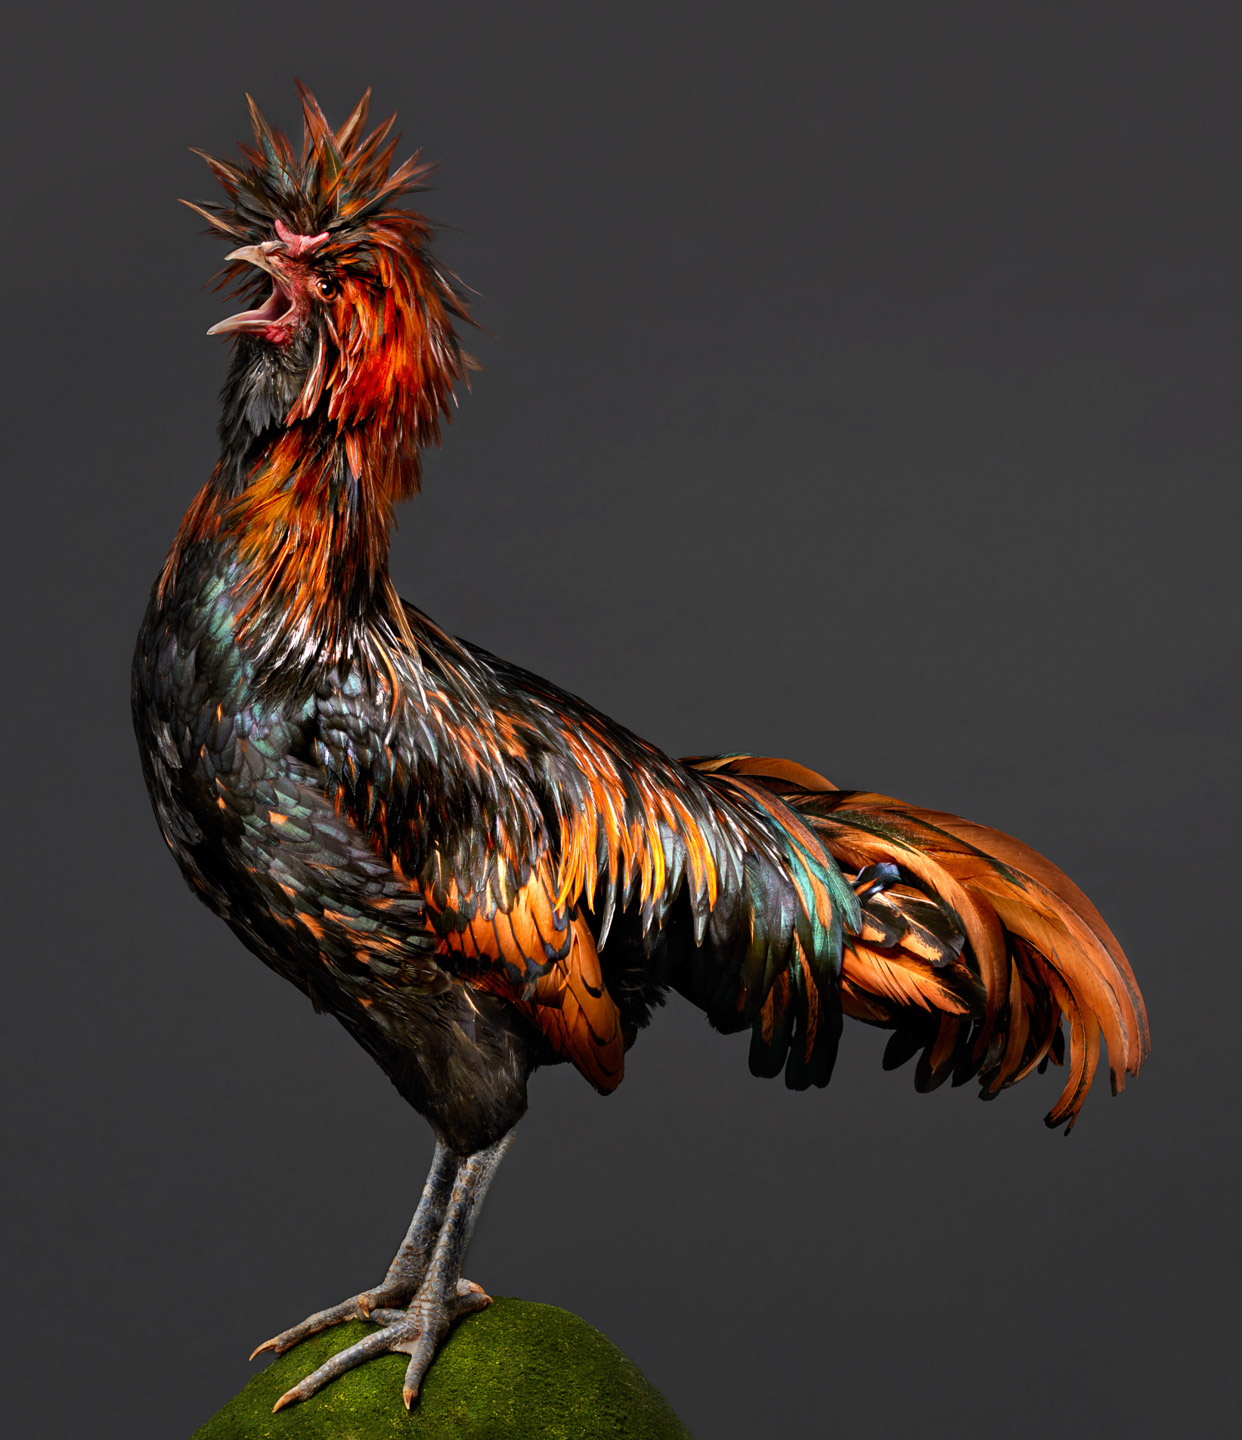 Joffrey the polish rooster cock